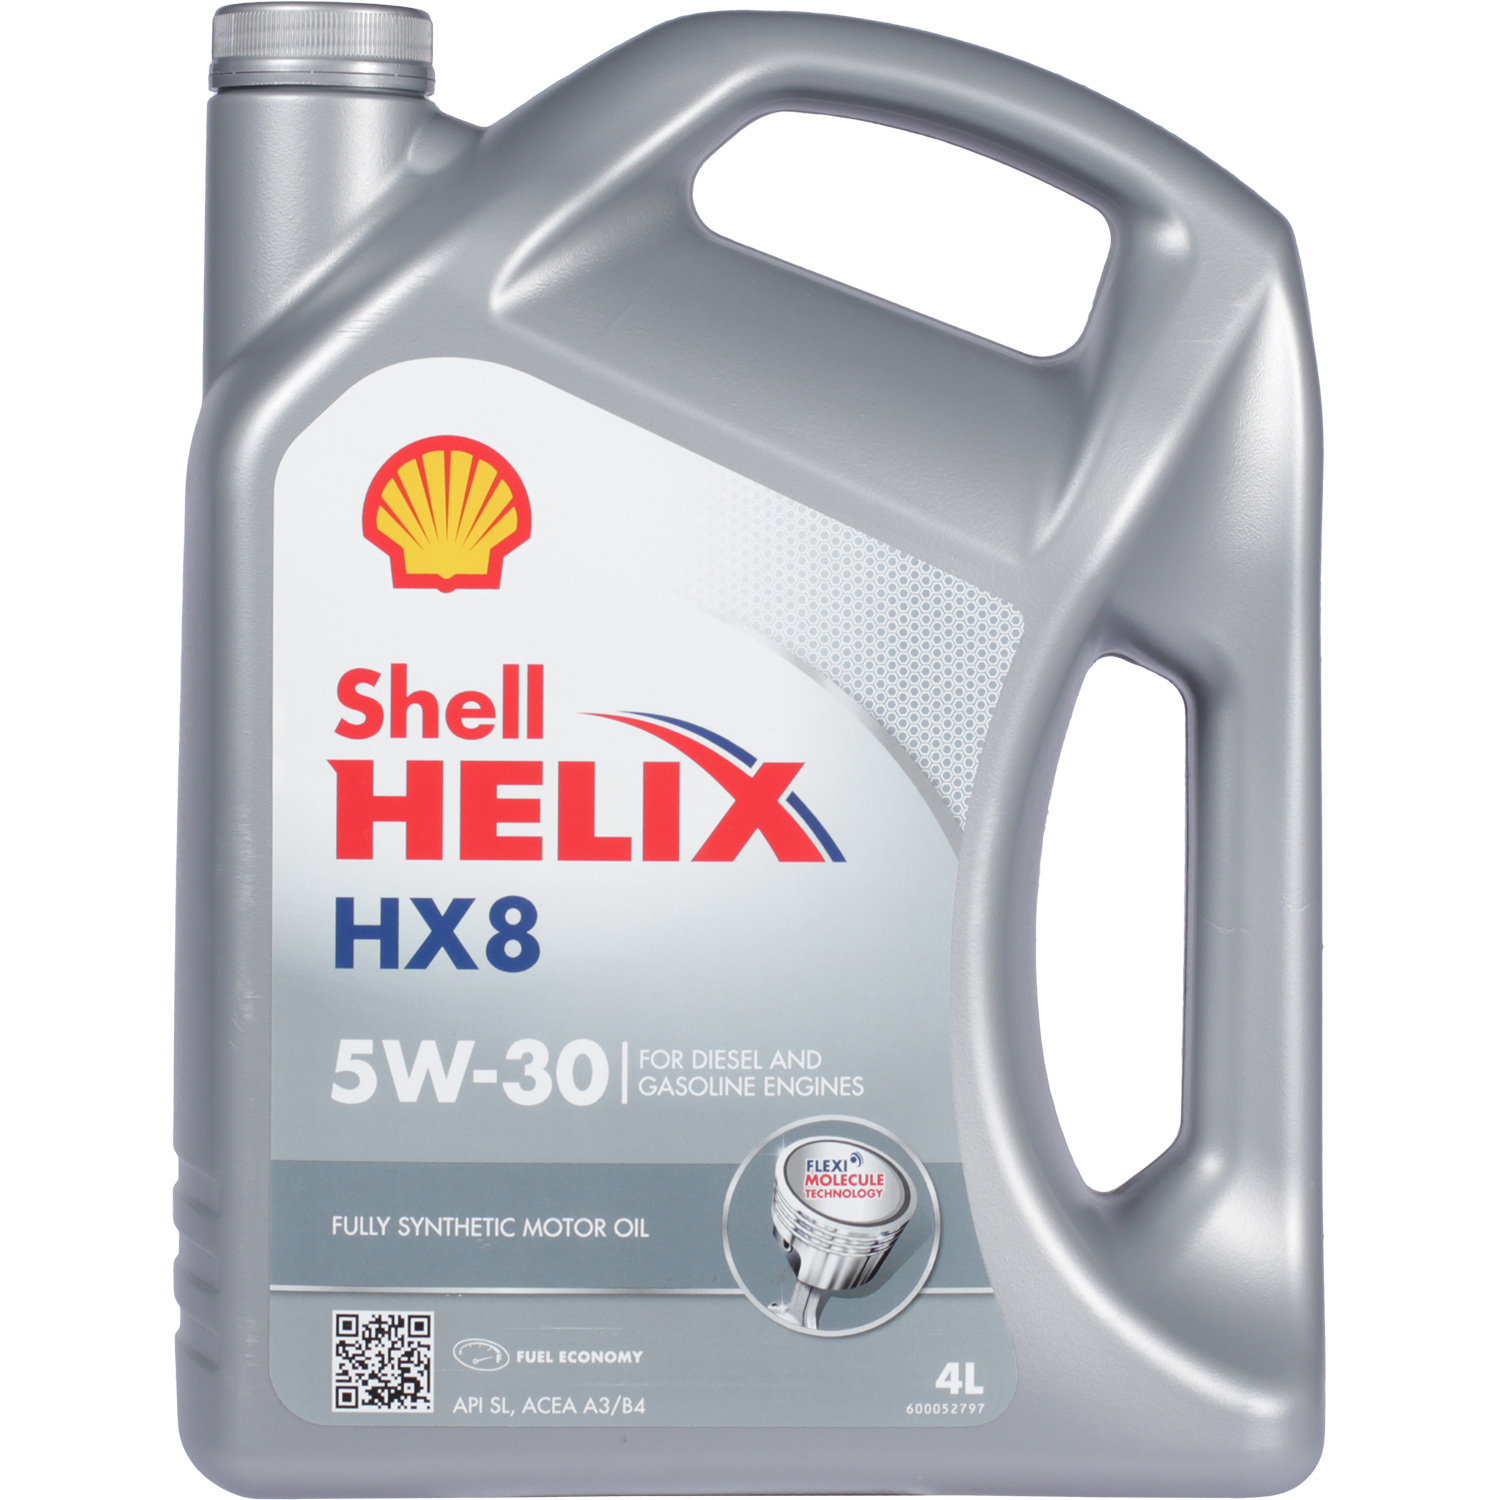 Shell Моторное масло Shell Helix HX8 5W-30, 4 л масло моторное shell helix ultra 5w 30 4 л